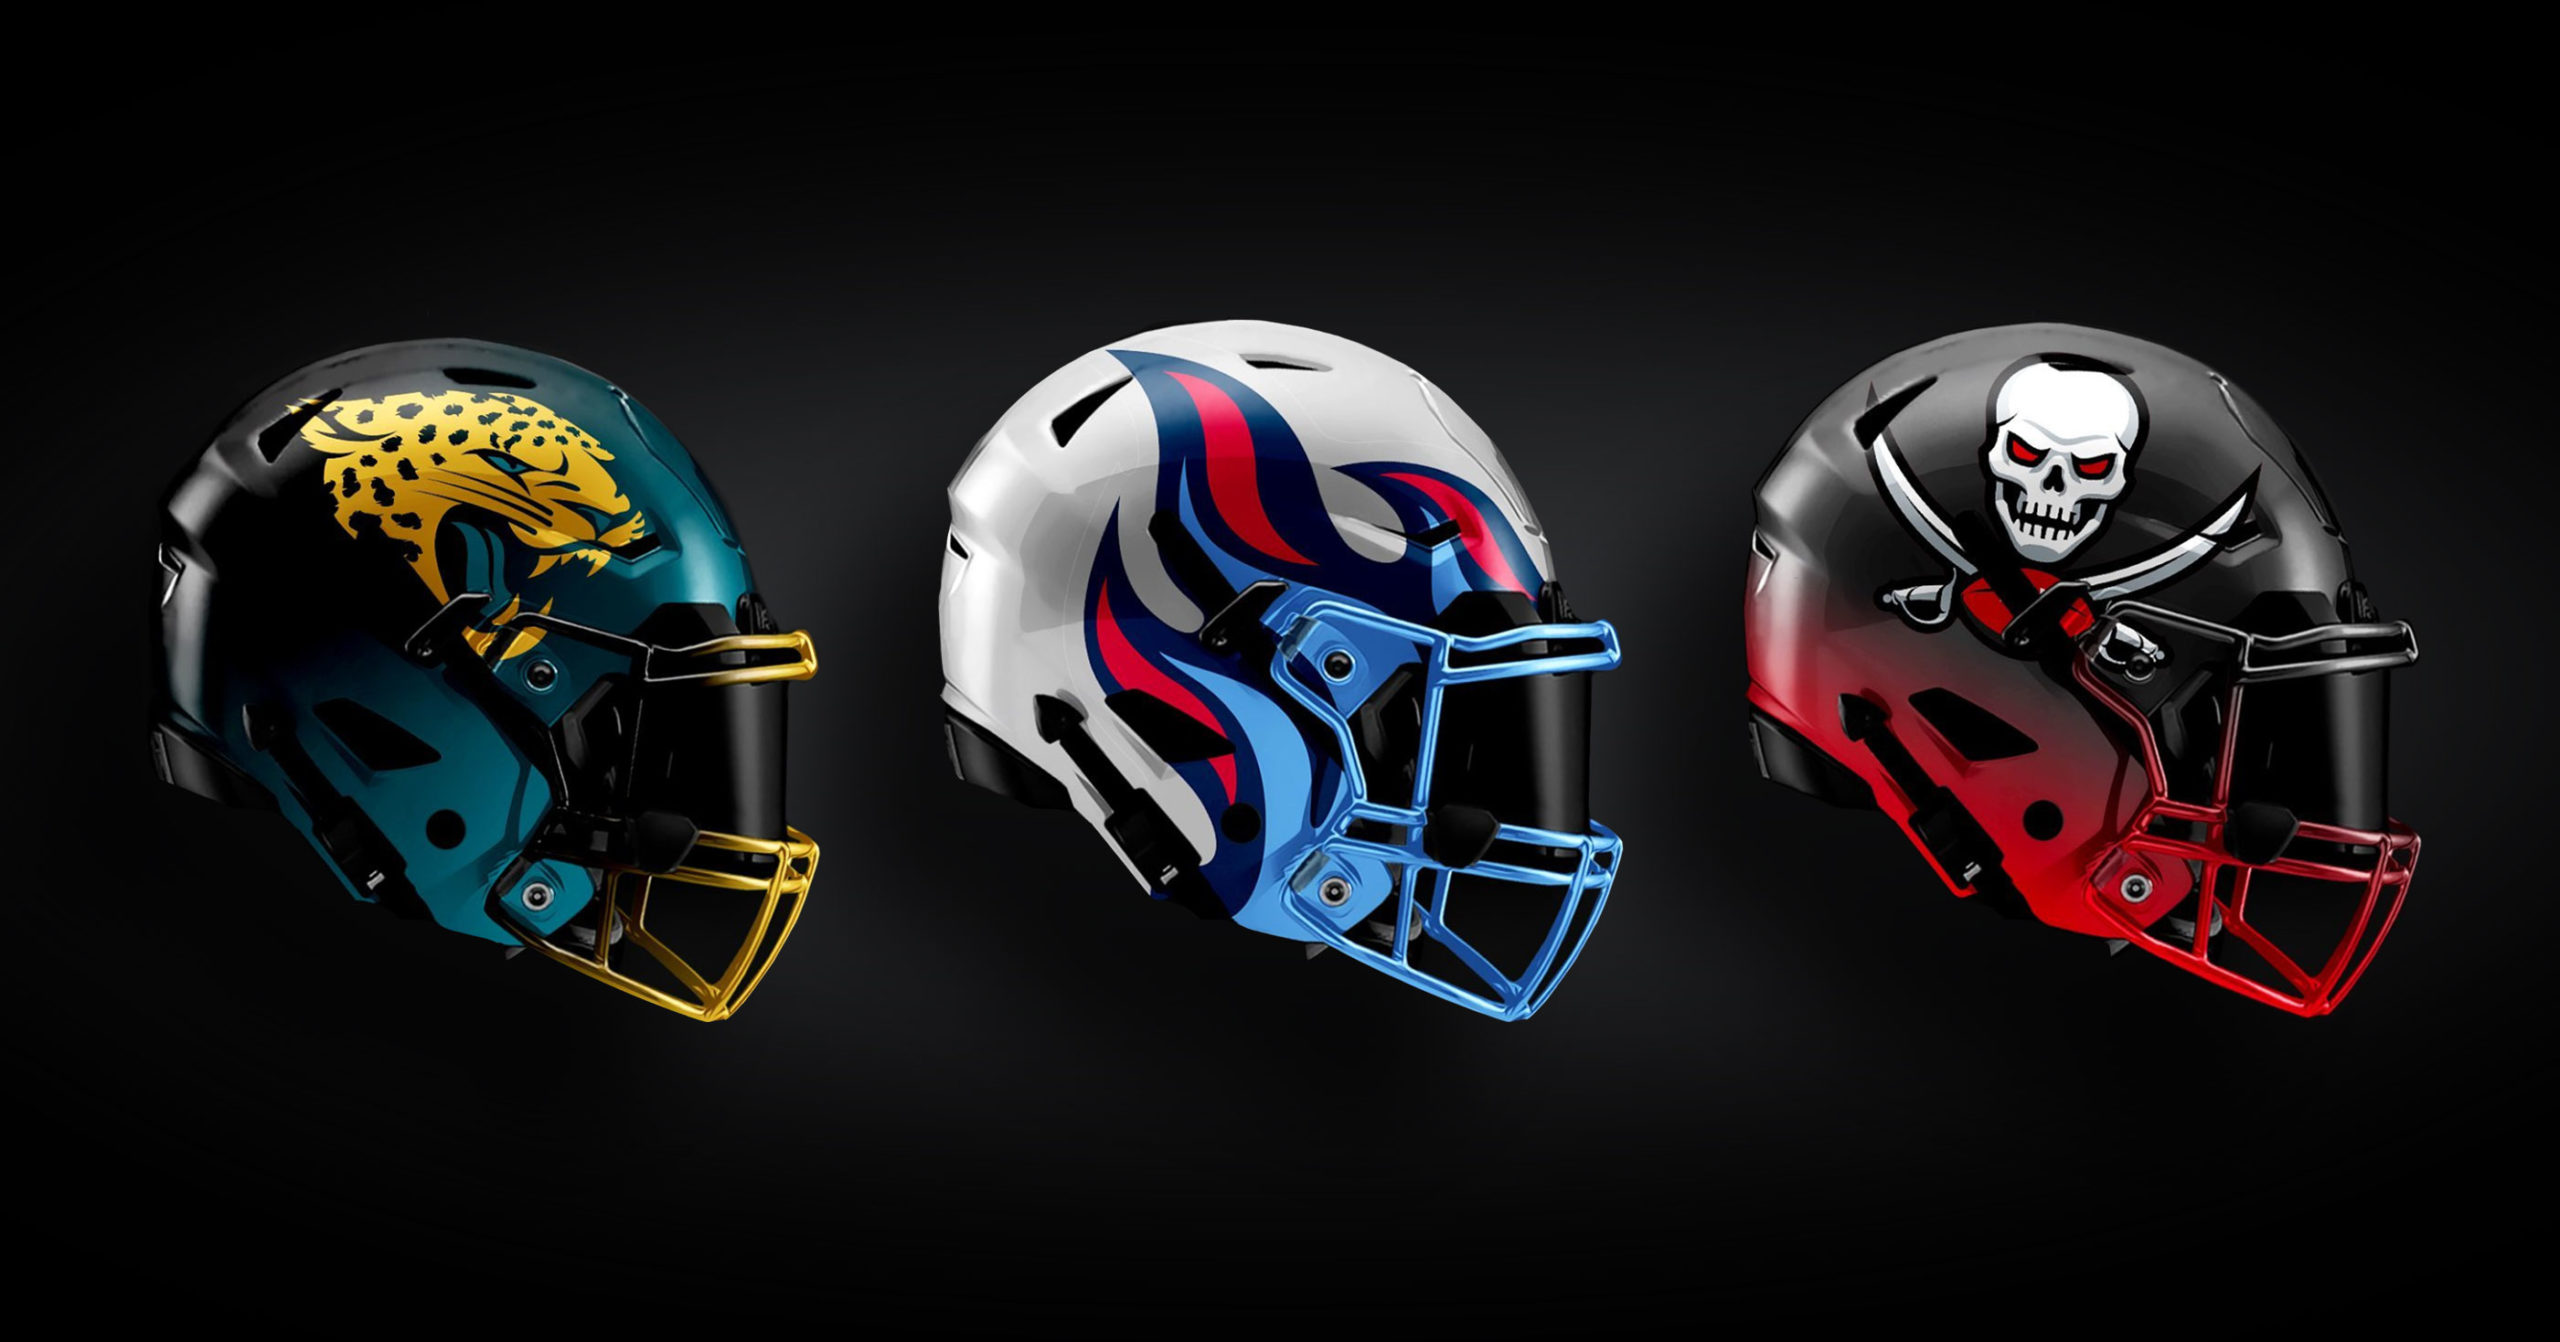 Designer Creates Absolutely Incredible Helmet Concepts For